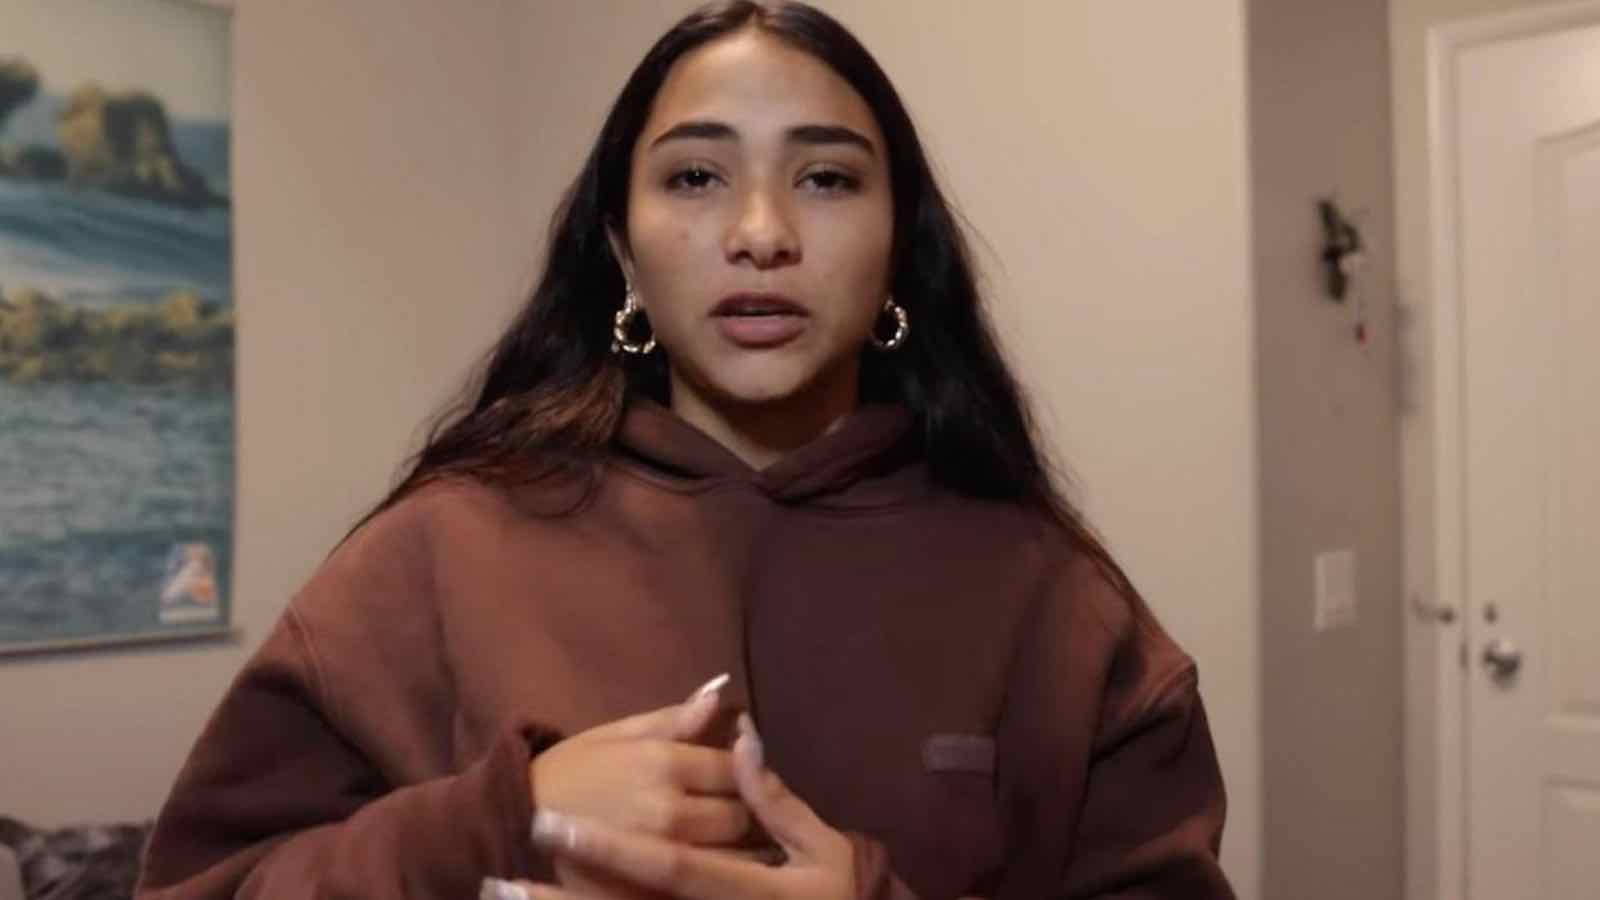 Will 'Hype House' get cancelled following this TikTok star's abuse ...